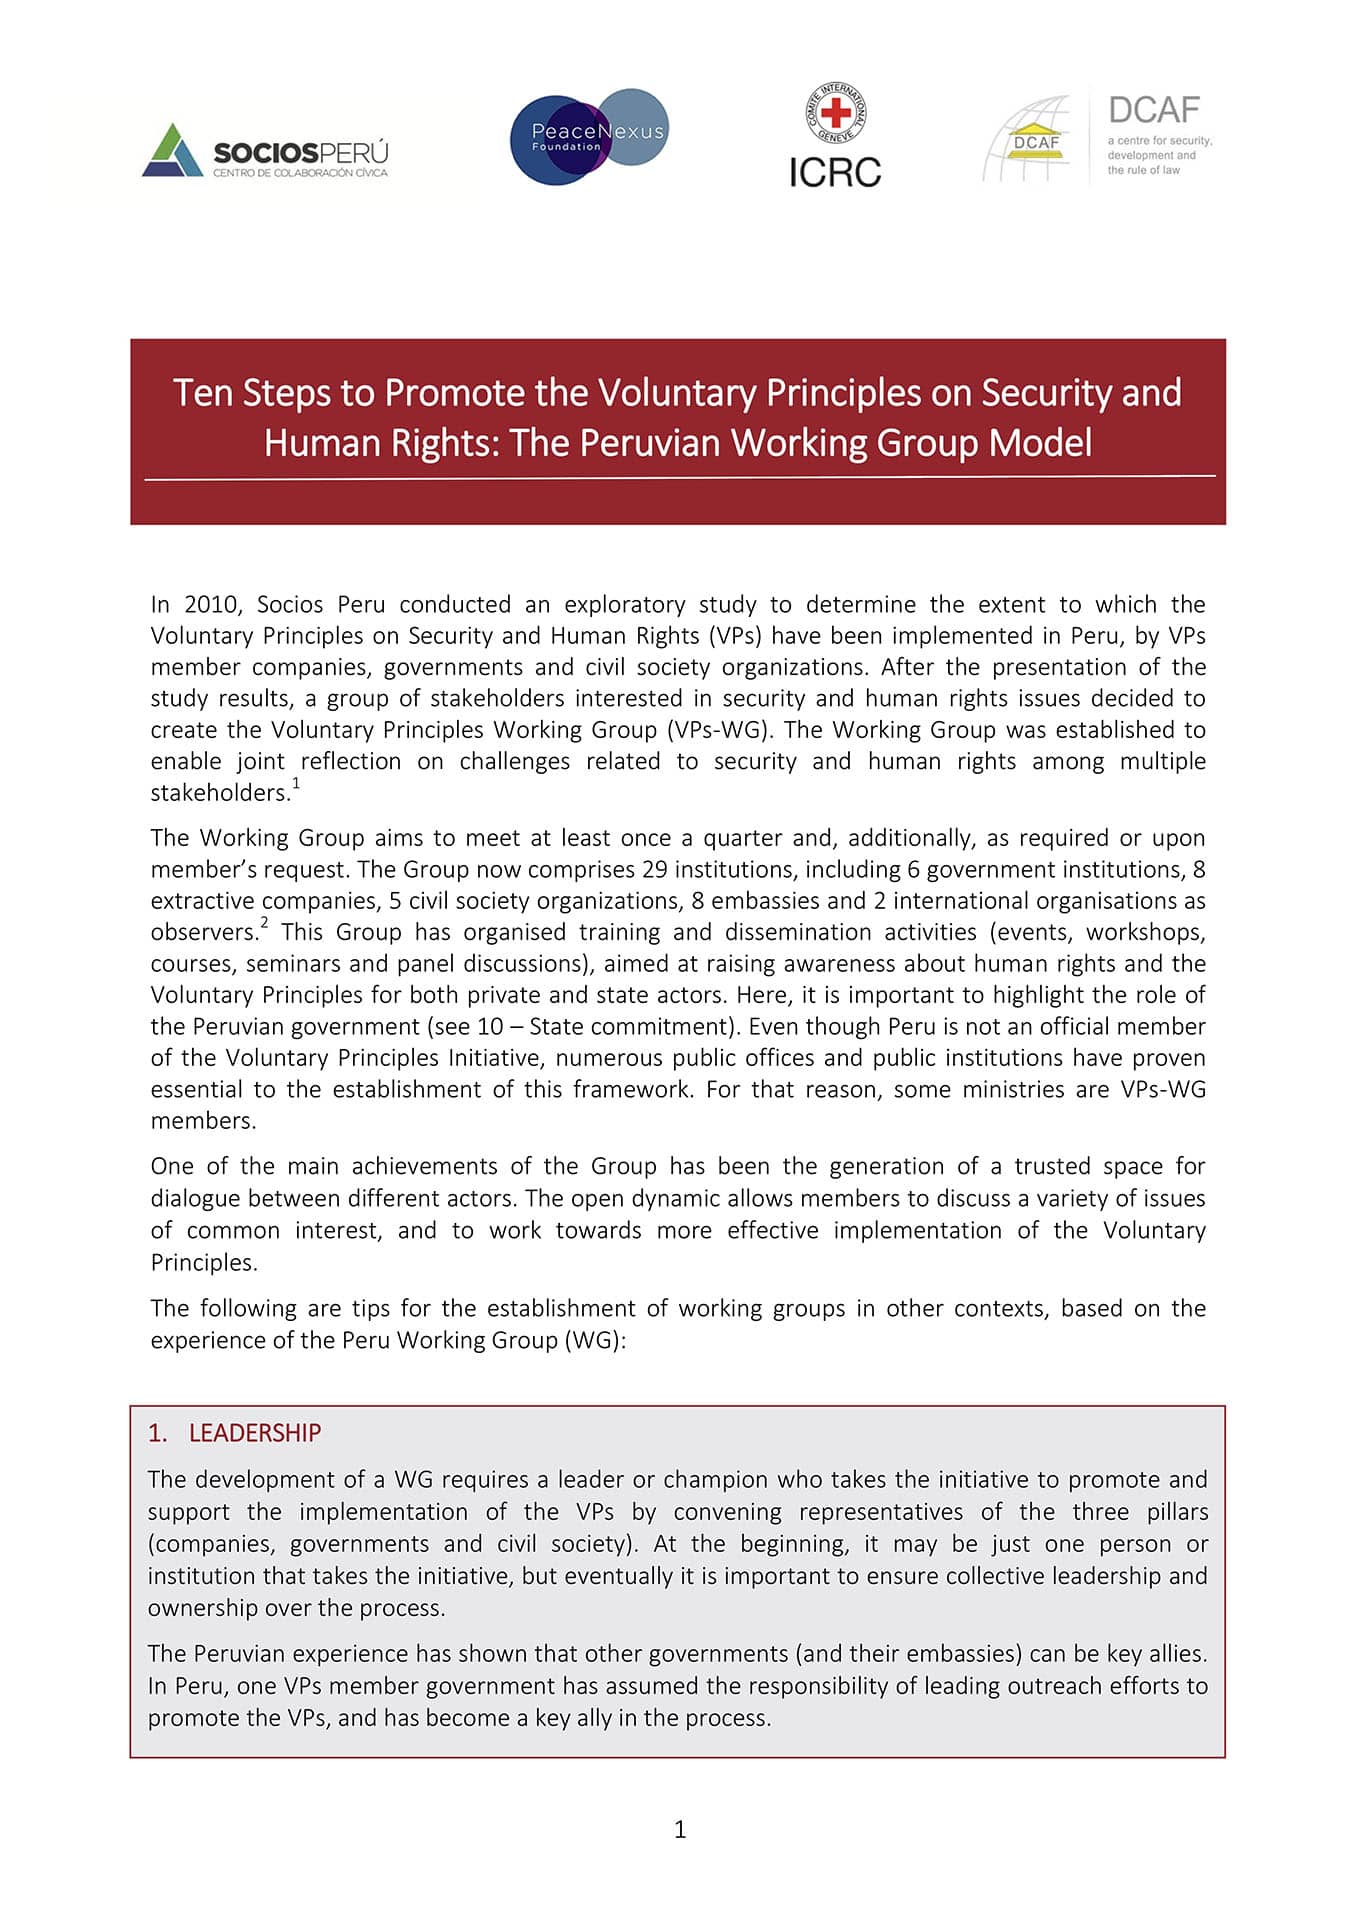 Ten Steps to Promote the Voluntary Principles on Security and Human Rights: The Peruvian Working Group Model (DCAF, ICRC, Socios Peru, and PeaceNexus, 2016)